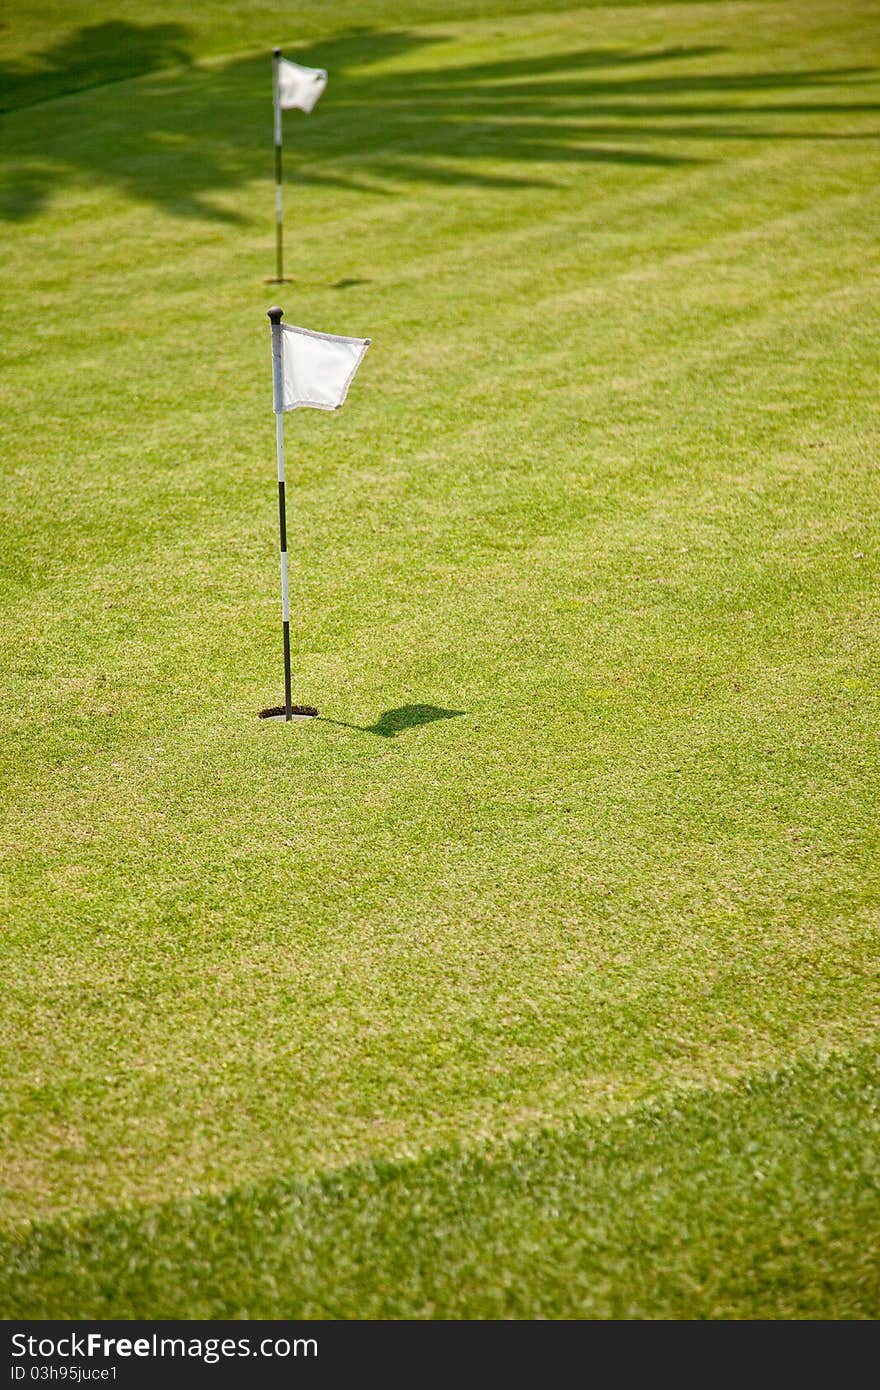 Golf Putting Green and Flag on Florida Golf Course